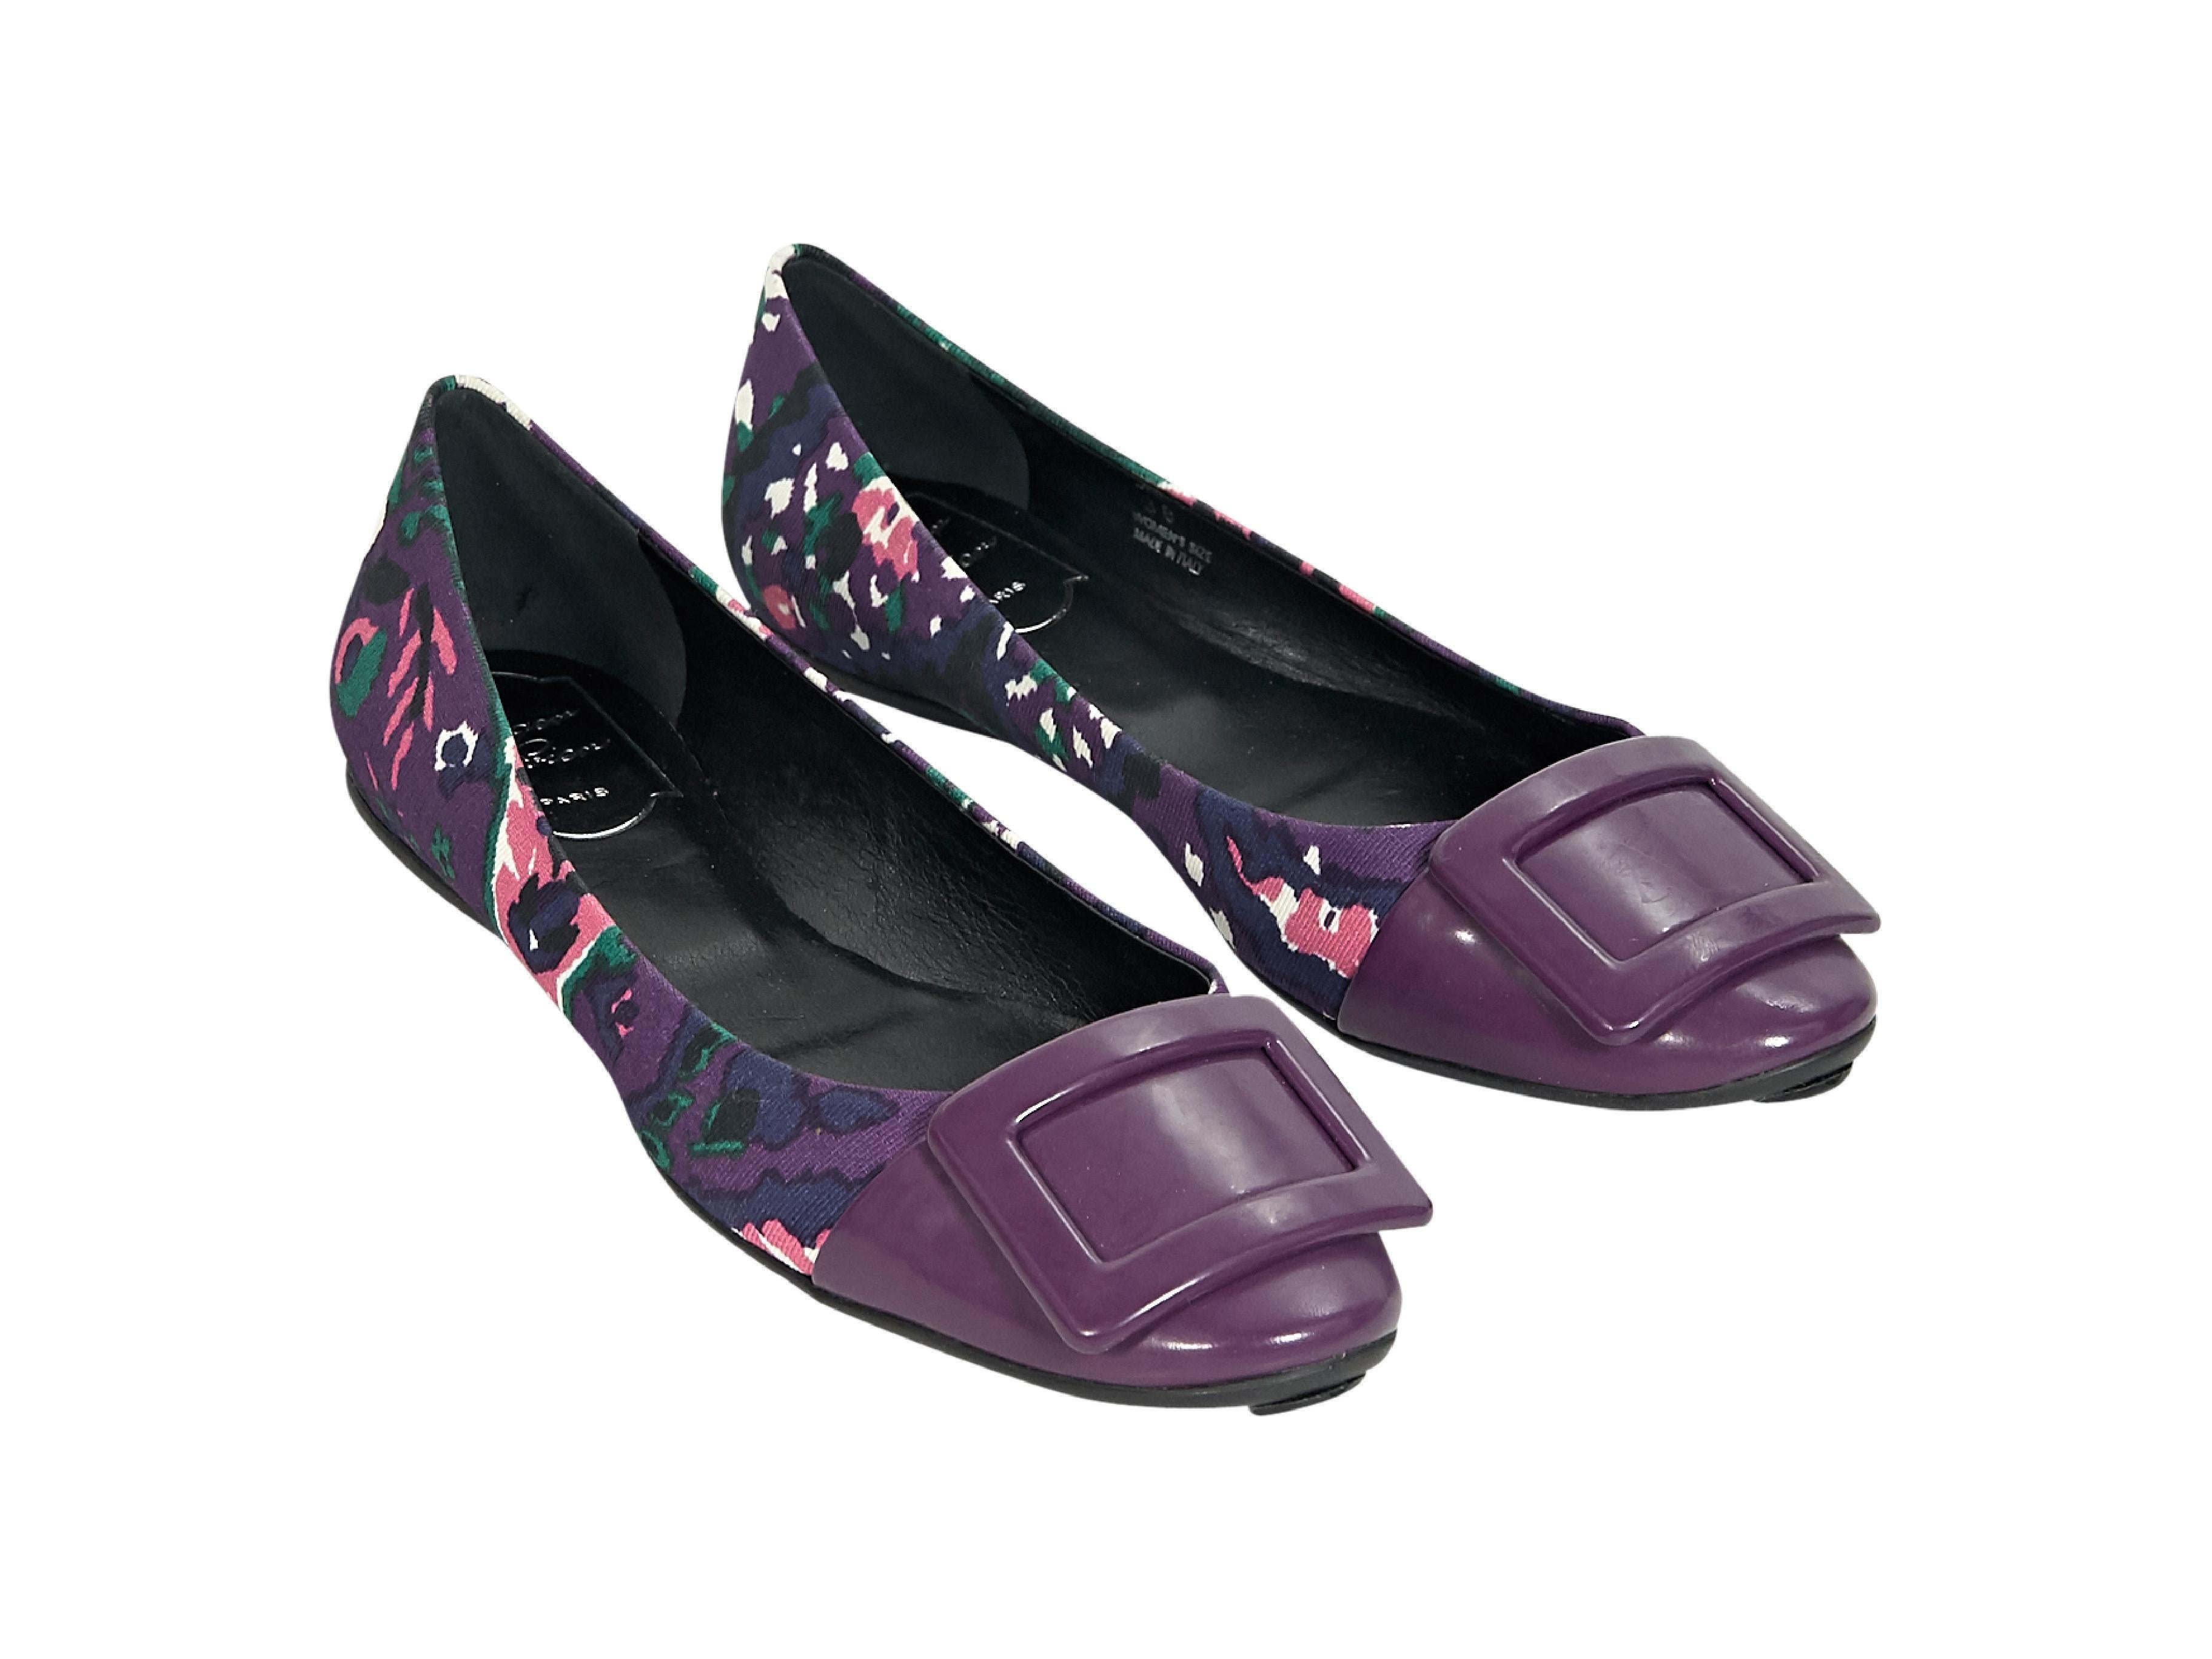 Product details:  Multicolor floral-printed ballet flats by Roger Vivier.  Buckle accents vamp.  Round toe.  Slip-on style. 
Condition: Pre-owned. Very good. 
Est. Retail $ 650.00